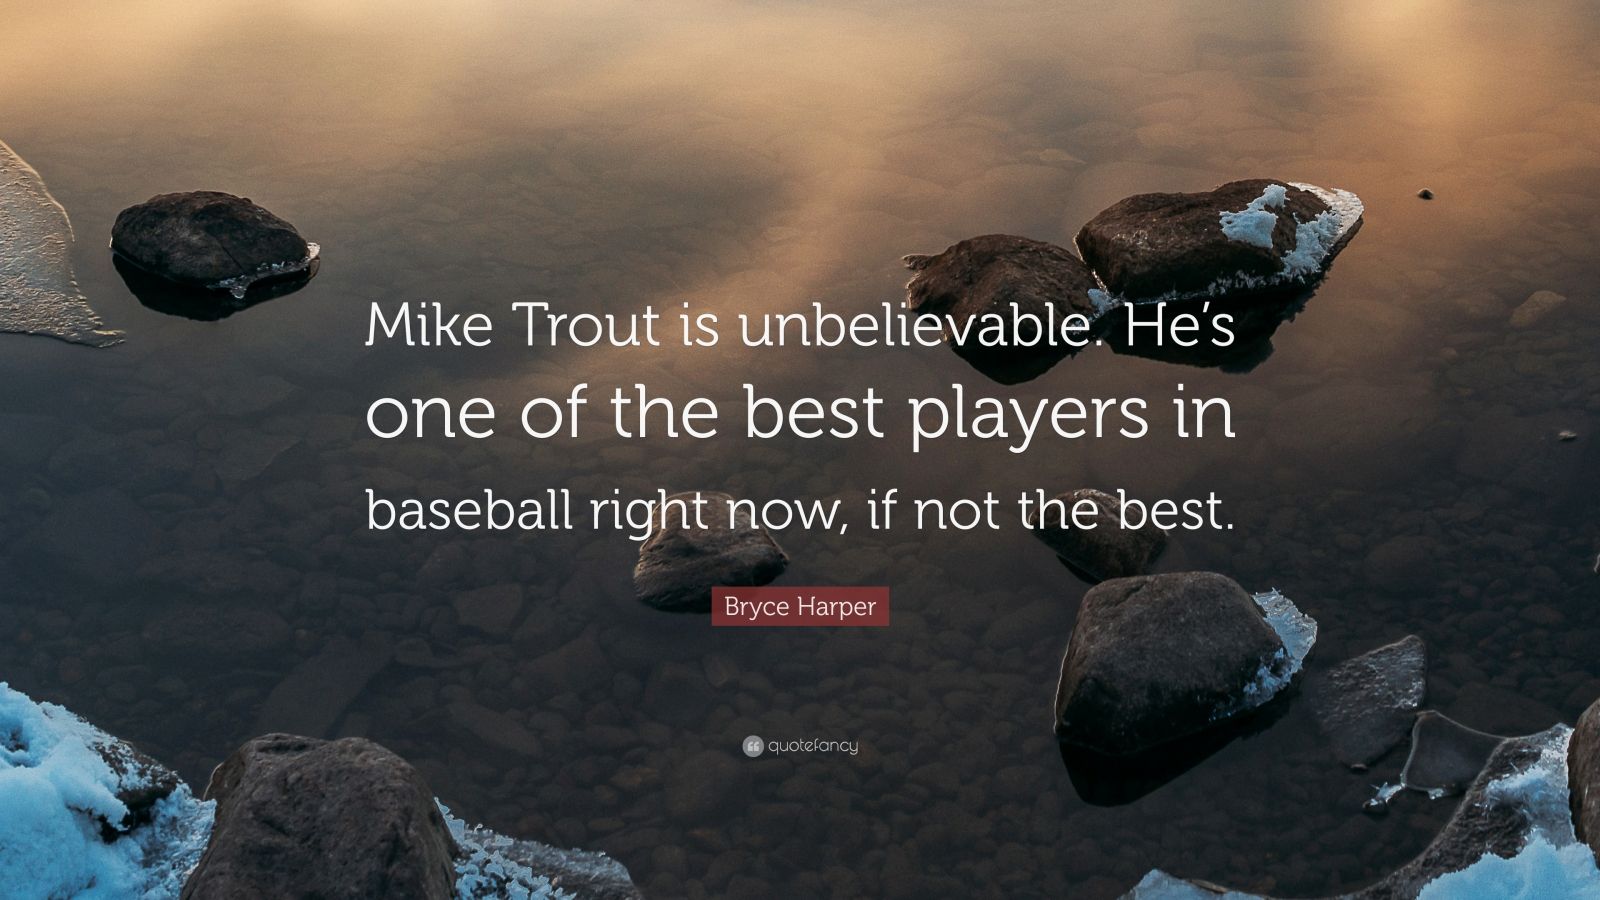 Bryce Harper Quote: "Mike Trout is unbelievable. He's one of the best players in baseball right ...